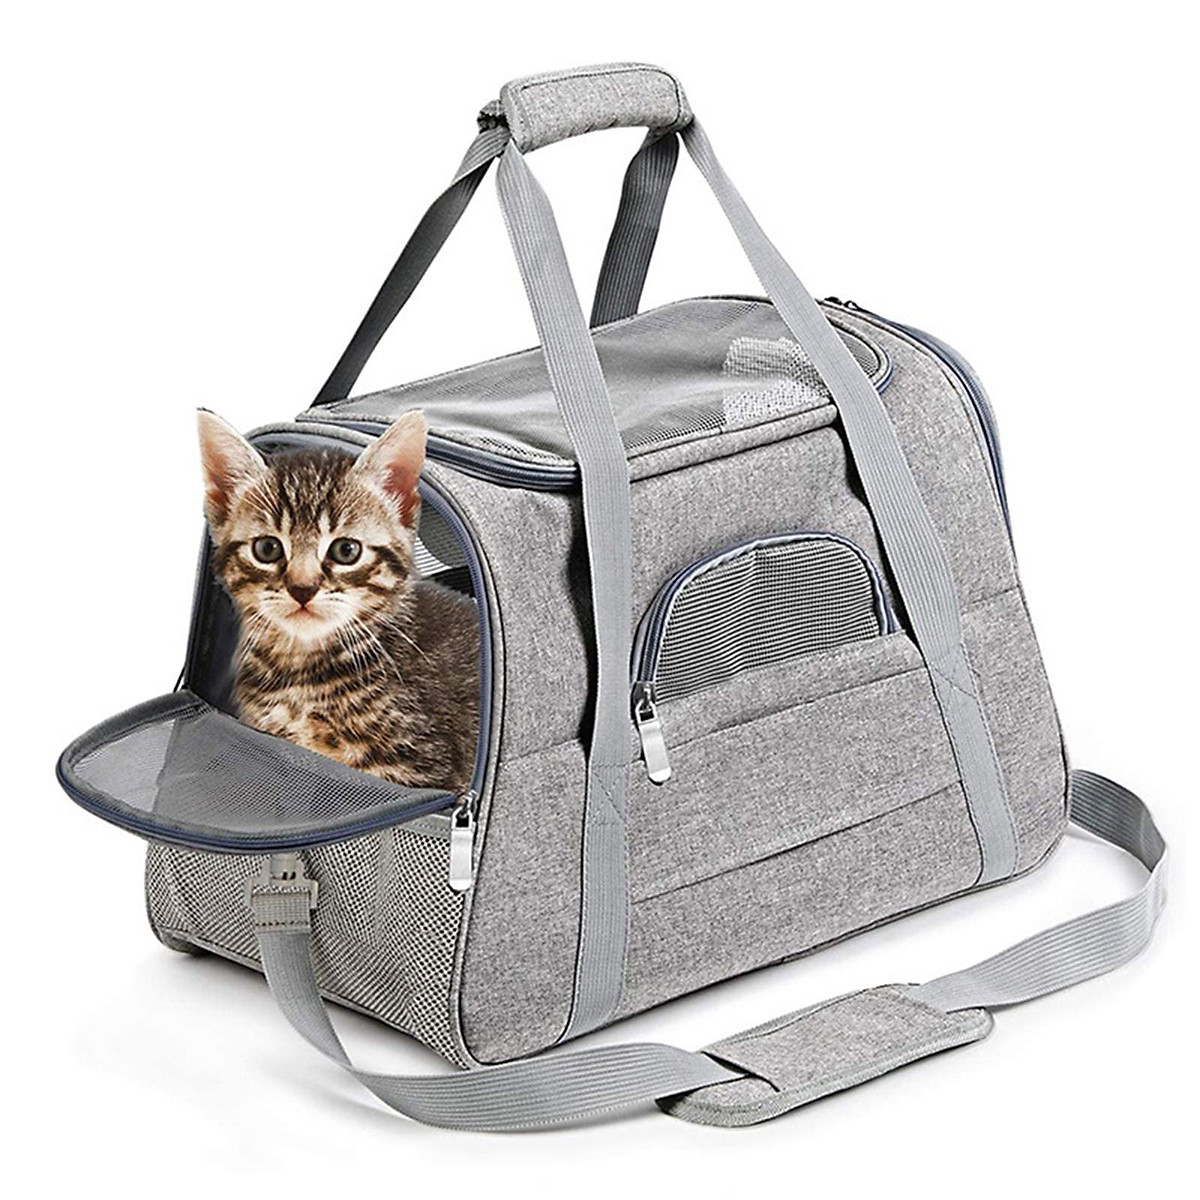 Pet Cat Carriers Dog Carrier Pet Carrier for Small Medium Cats Dogs  Puppies, Dog Carrier Soft, Collapsible Puppy Carrier Bag Breathable Package